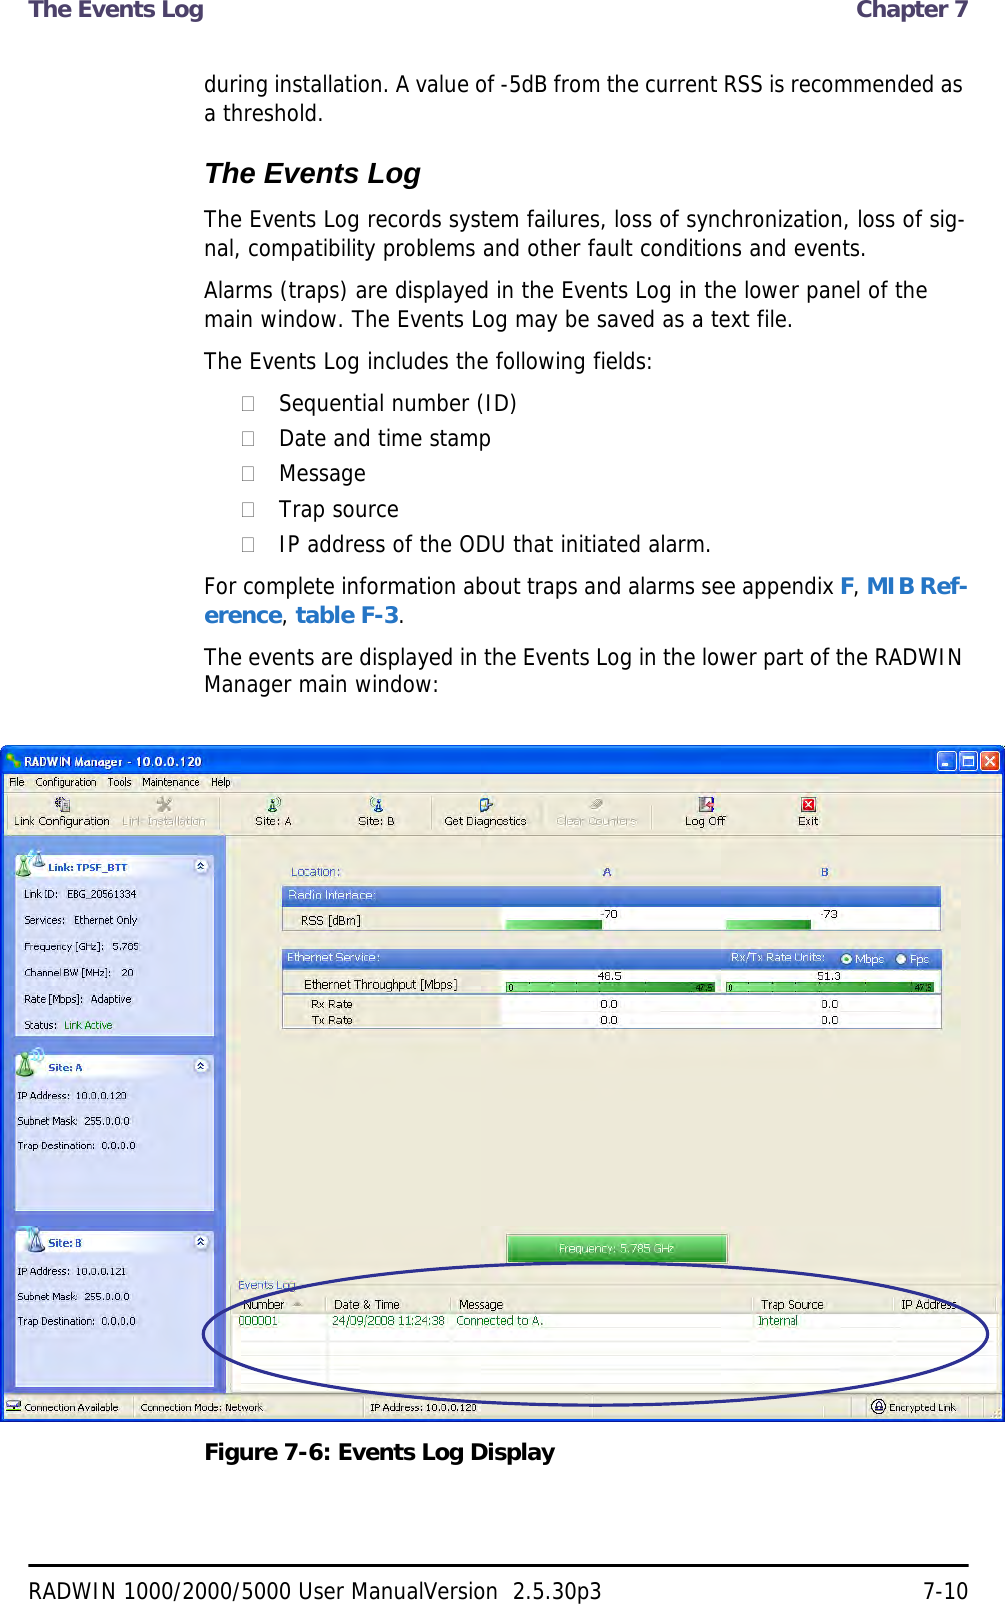 The Events Log  Chapter 7RADWIN 1000/2000/5000 User ManualVersion  2.5.30p3 7-10during installation. A value of -5dB from the current RSS is recommended as a threshold.The Events LogThe Events Log records system failures, loss of synchronization, loss of sig-nal, compatibility problems and other fault conditions and events.Alarms (traps) are displayed in the Events Log in the lower panel of the main window. The Events Log may be saved as a text file.The Events Log includes the following fields:Sequential number (ID)Date and time stampMessageTrap sourceIP address of the ODU that initiated alarm.For complete information about traps and alarms see appendix F, MIB Ref-erence, table F-3.The events are displayed in the Events Log in the lower part of the RADWIN Manager main window:Figure 7-6: Events Log Display